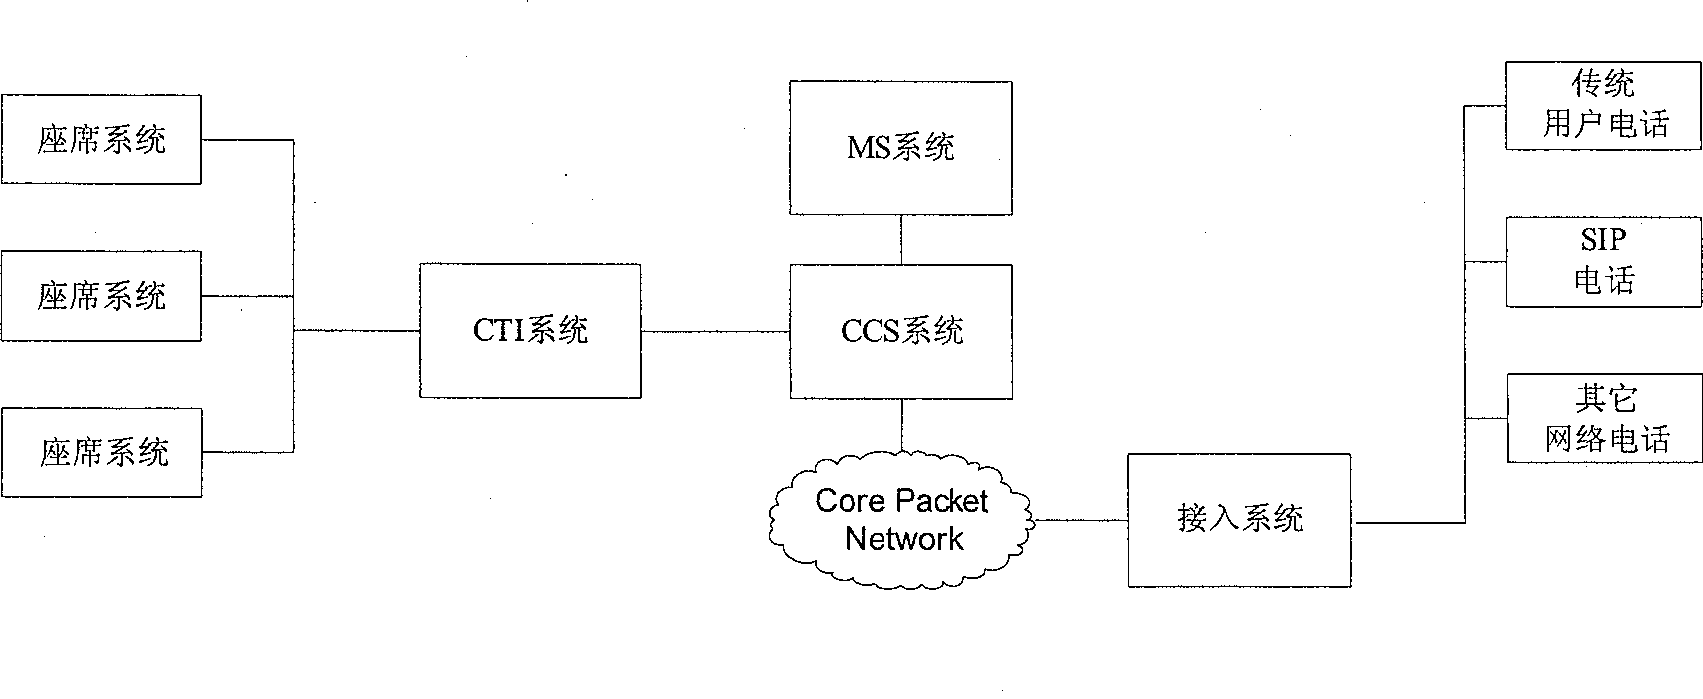 System and method for supporting telephone application function by computer in IP network